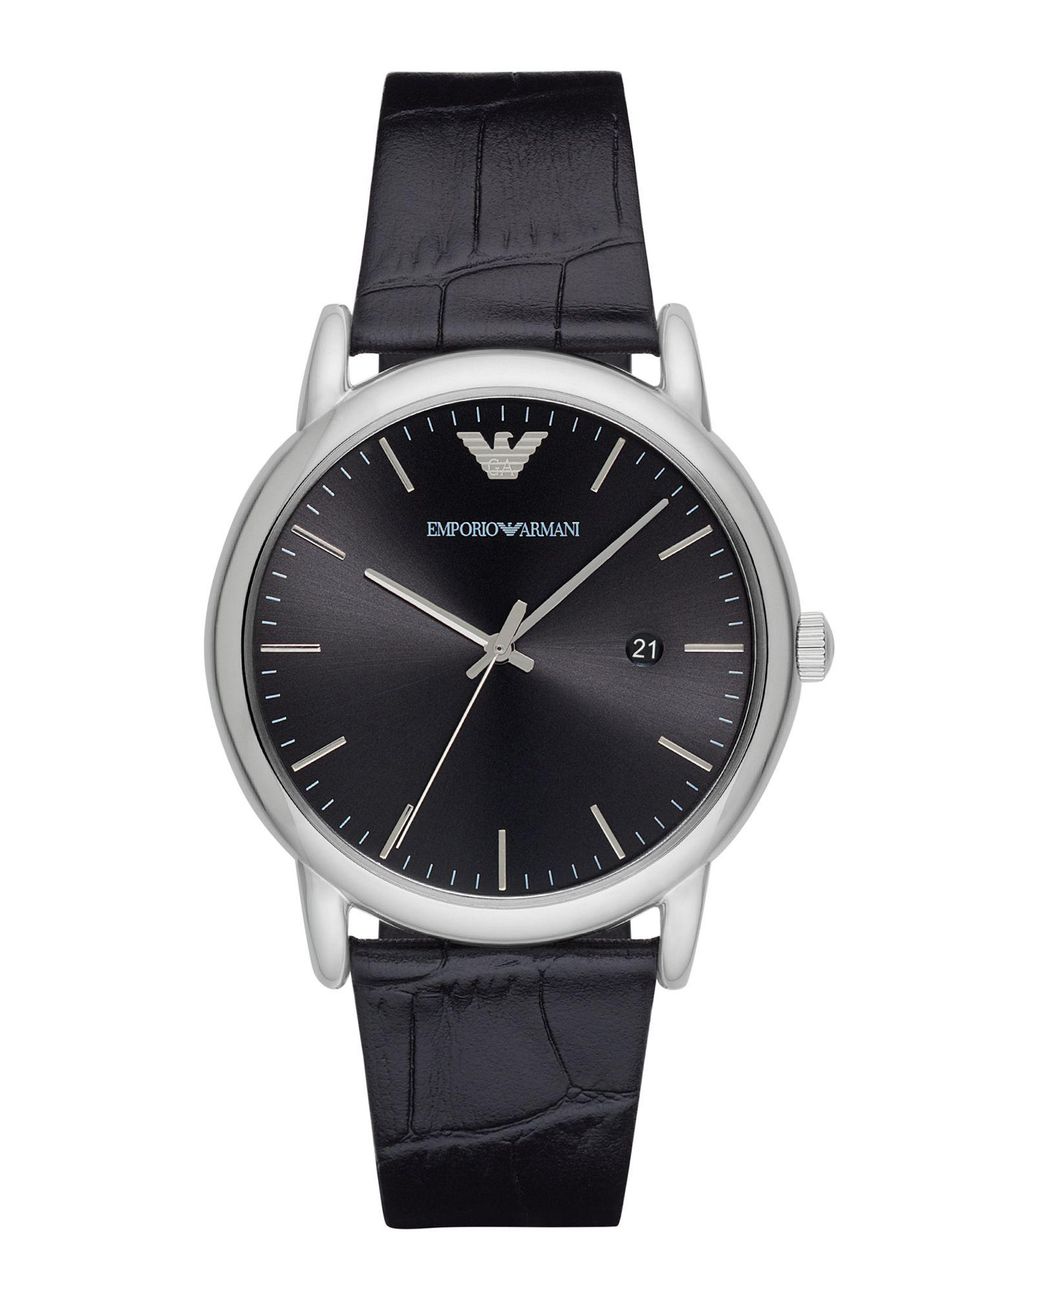 Emporio Armani Leather Wrist Watch in Black for Men - Lyst